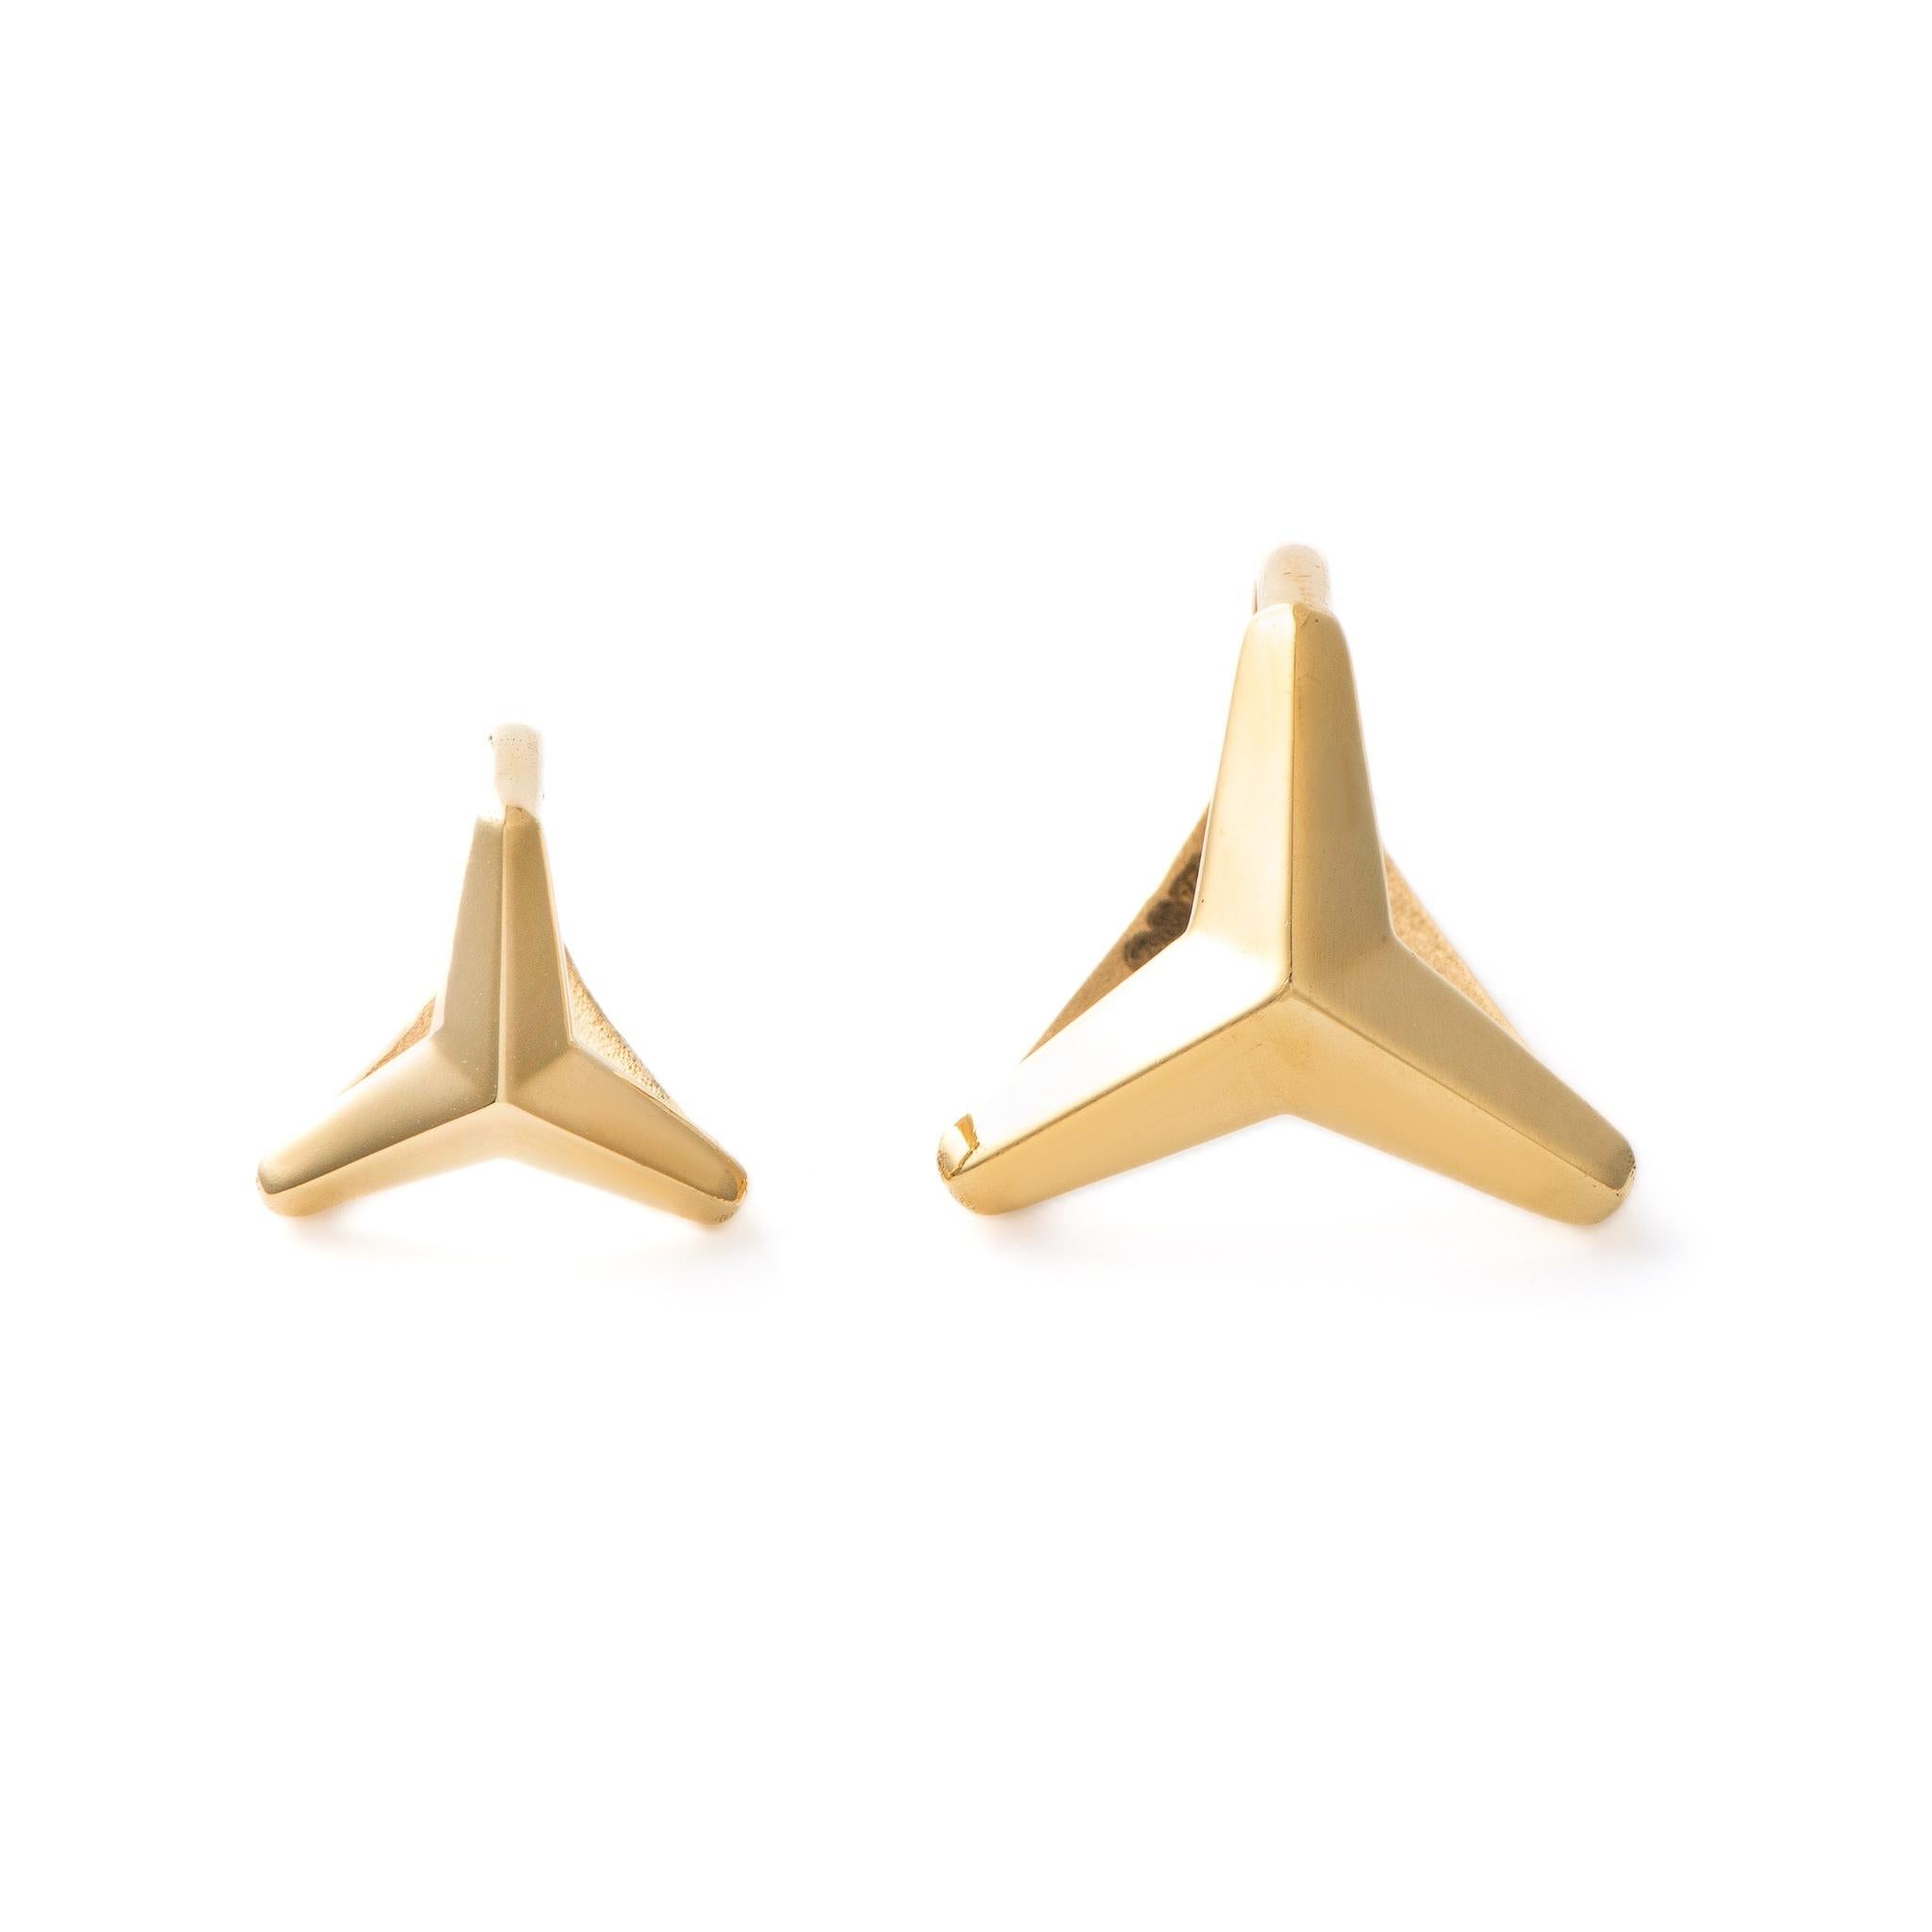 The Three Pointed Star large ear cuff is a standout piece of jewelry crafted with precision using 18K yellow gold and hallmarked in Cyprus. It comes in a highly polished finish, while its lightweight and comfortable design makes it perfect for any